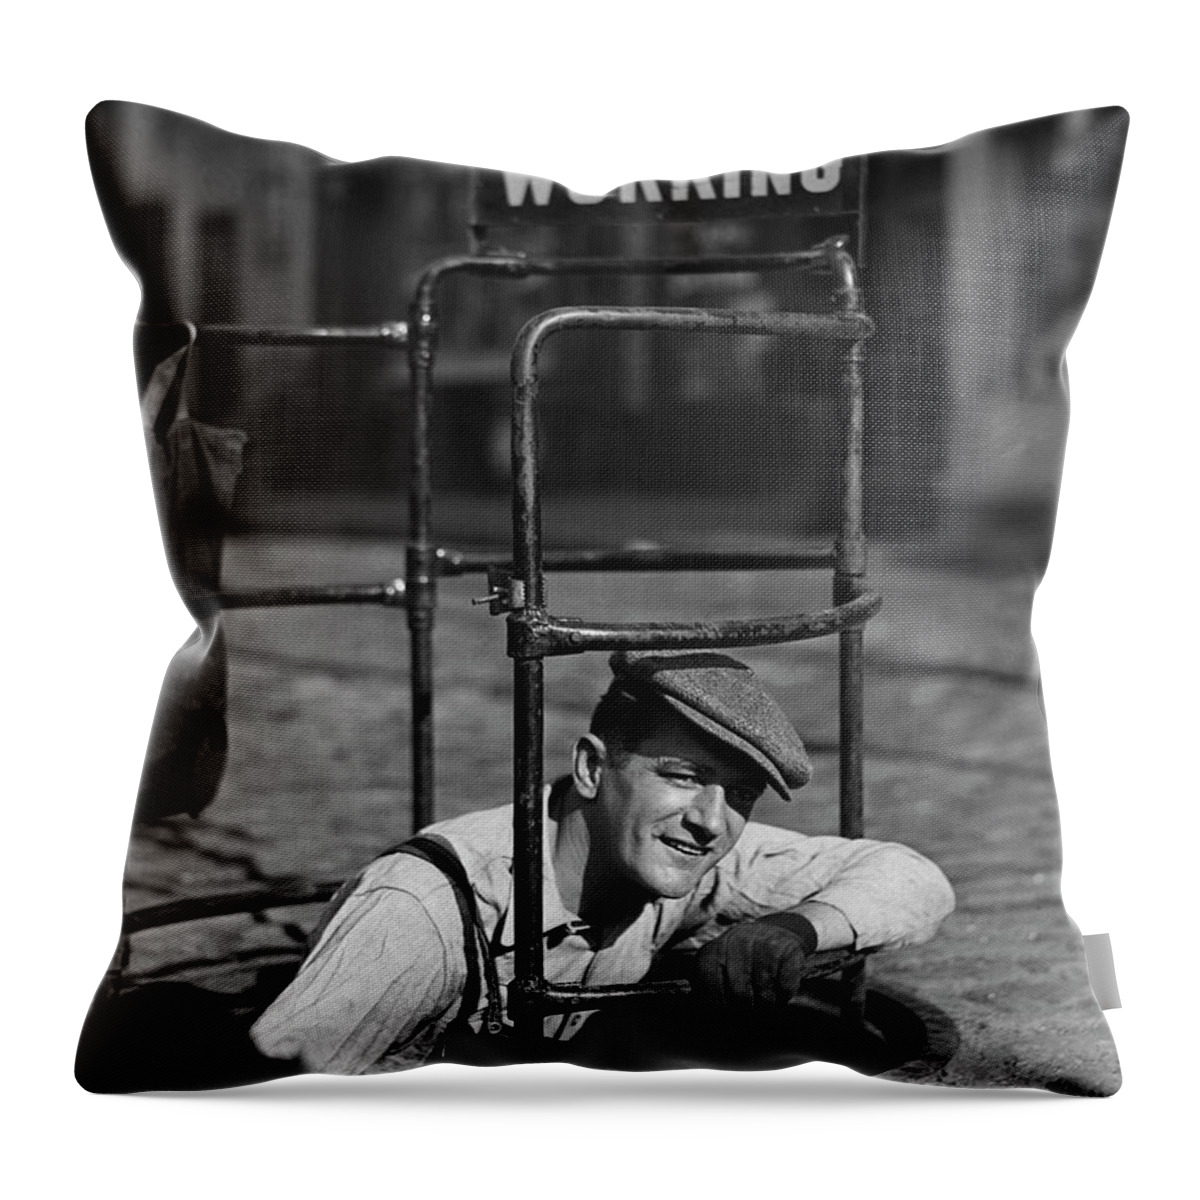 People Throw Pillow featuring the photograph Worker Climbing Into Manhole by George Marks